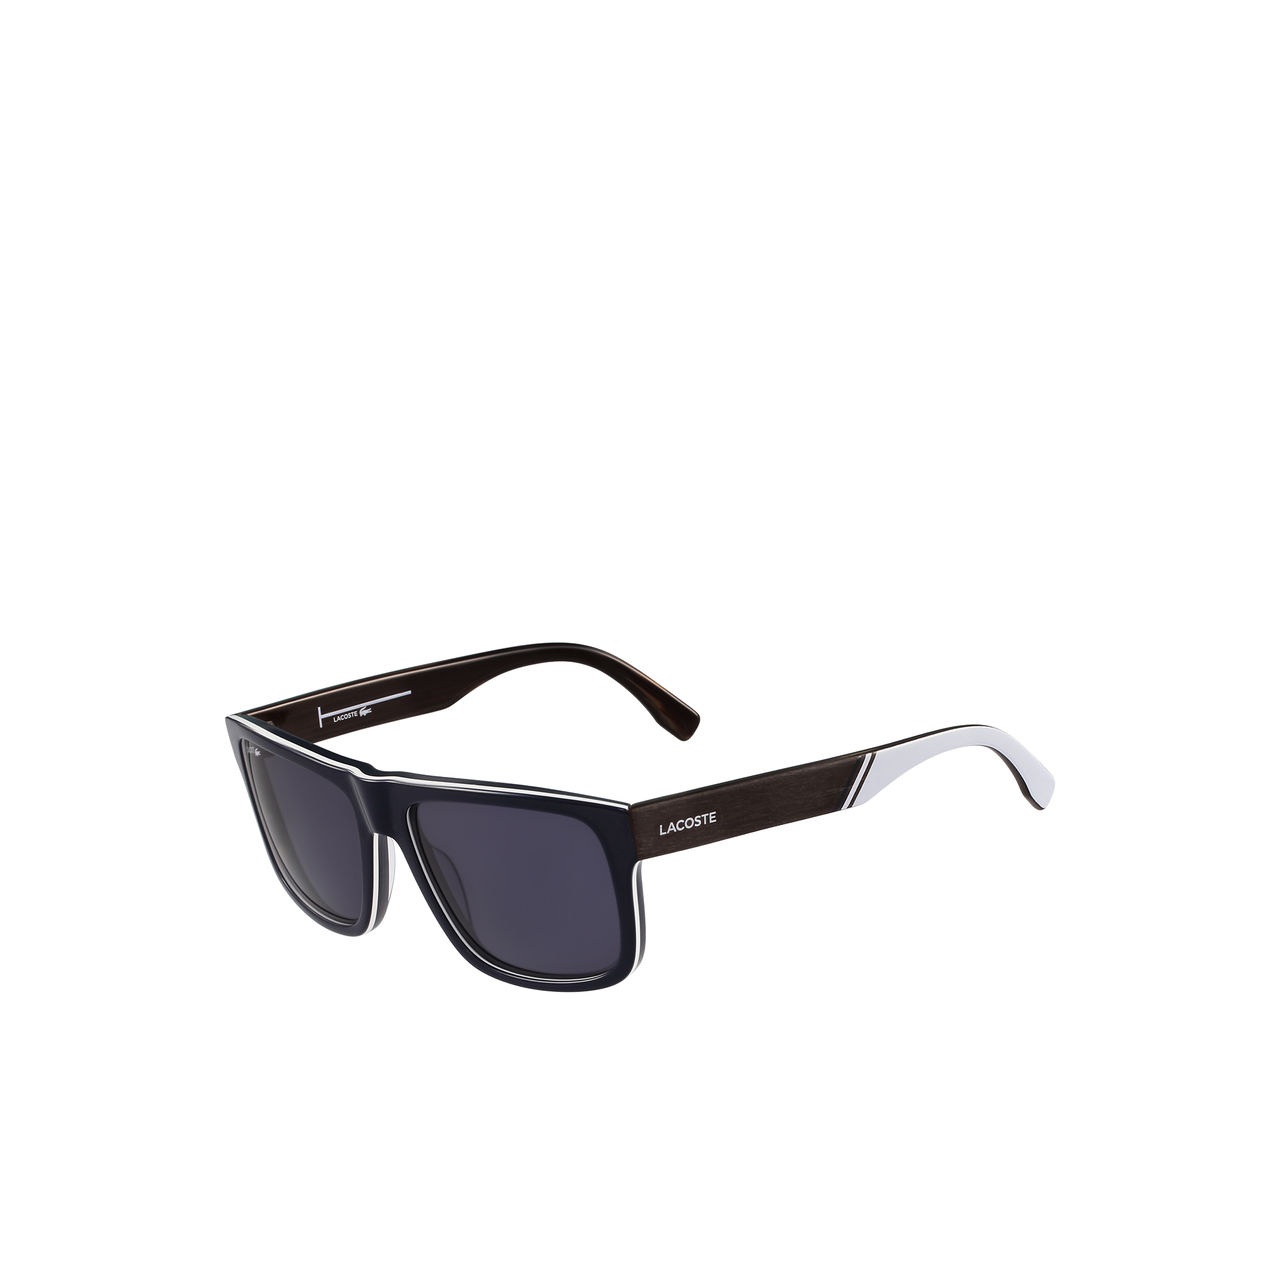 LACOSTE BLACK LT12 SUNGLASSES WITH WOOD EFFECT 424